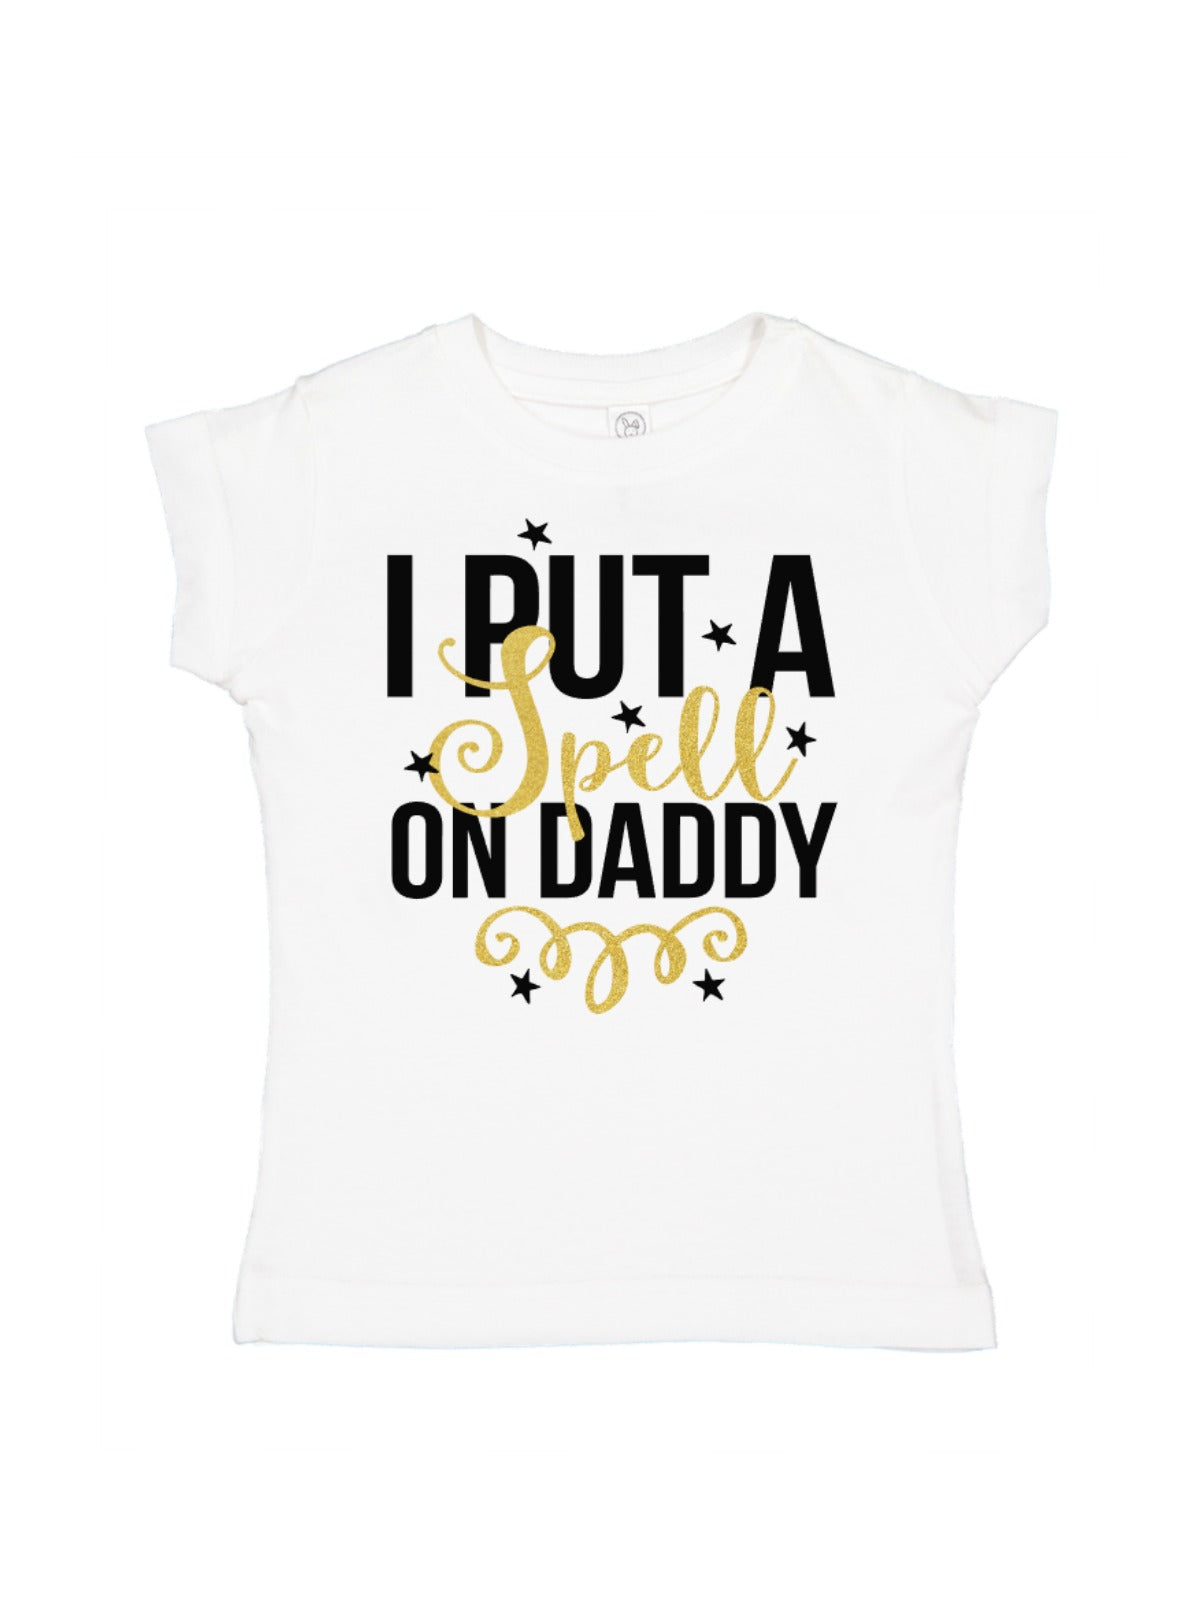 I put a spell on daddy girls tee